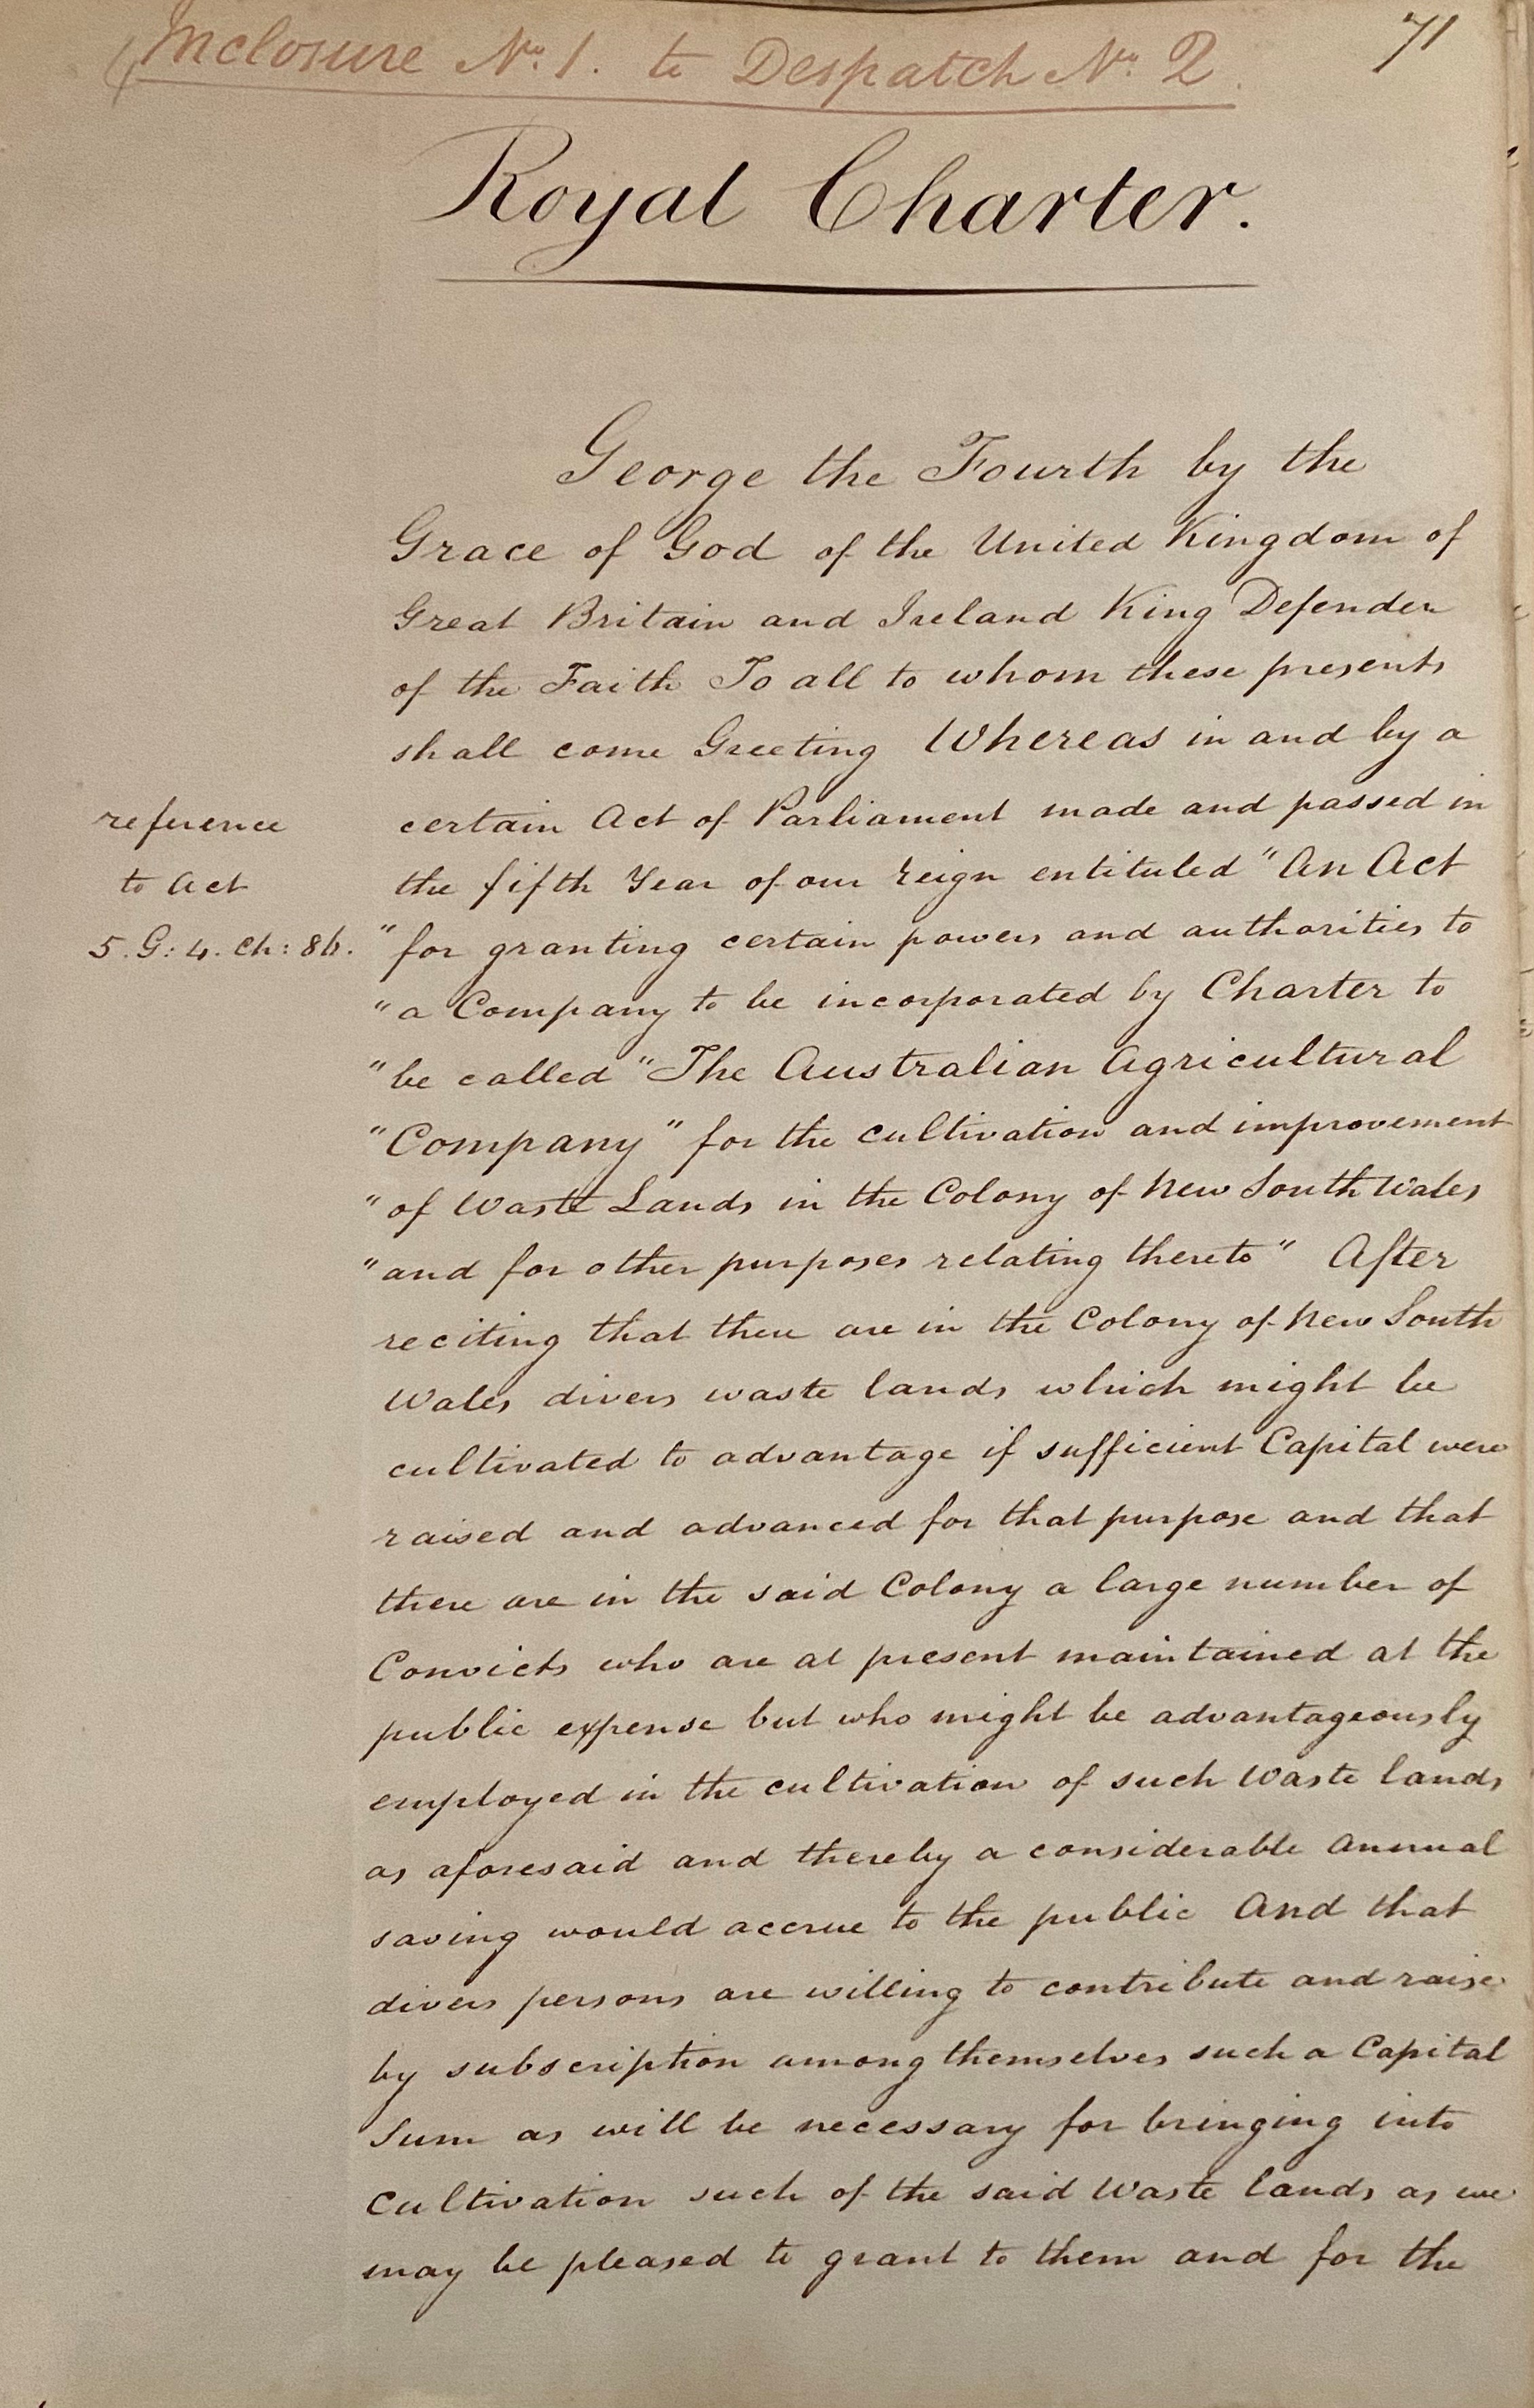 Copy of the Australian Agricultural Company Royal Charter recorded in a Company despatch, 1824 (78-9-1).  